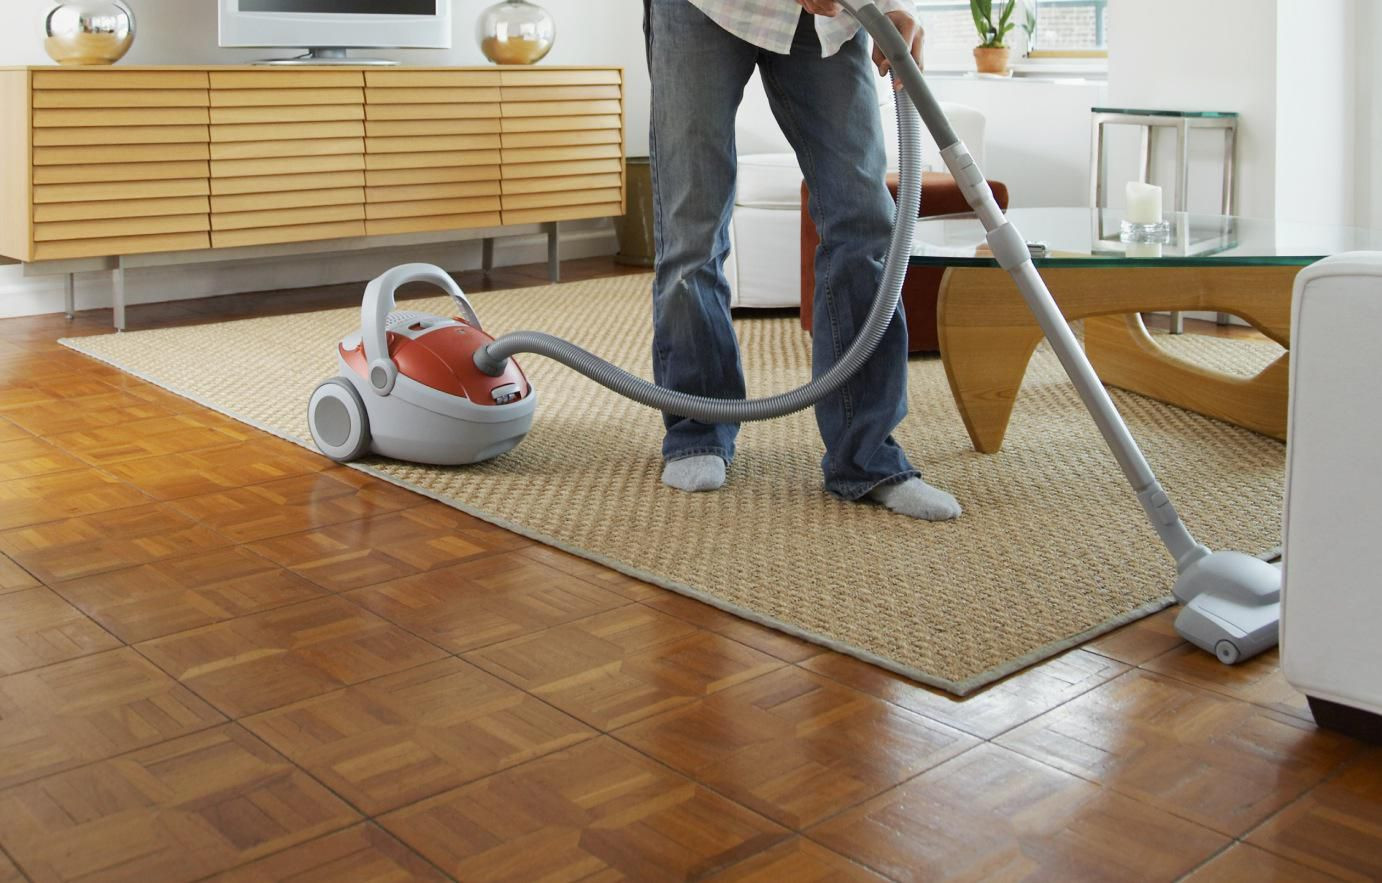 24 Nice the Best Vacuum for Hardwood Floors 2024 free download the best vacuum for hardwood floors of the best ways to get rid of fleas in the house and yard regarding sb10069129m 002 56a493ba5f9b58b7d0d7a465